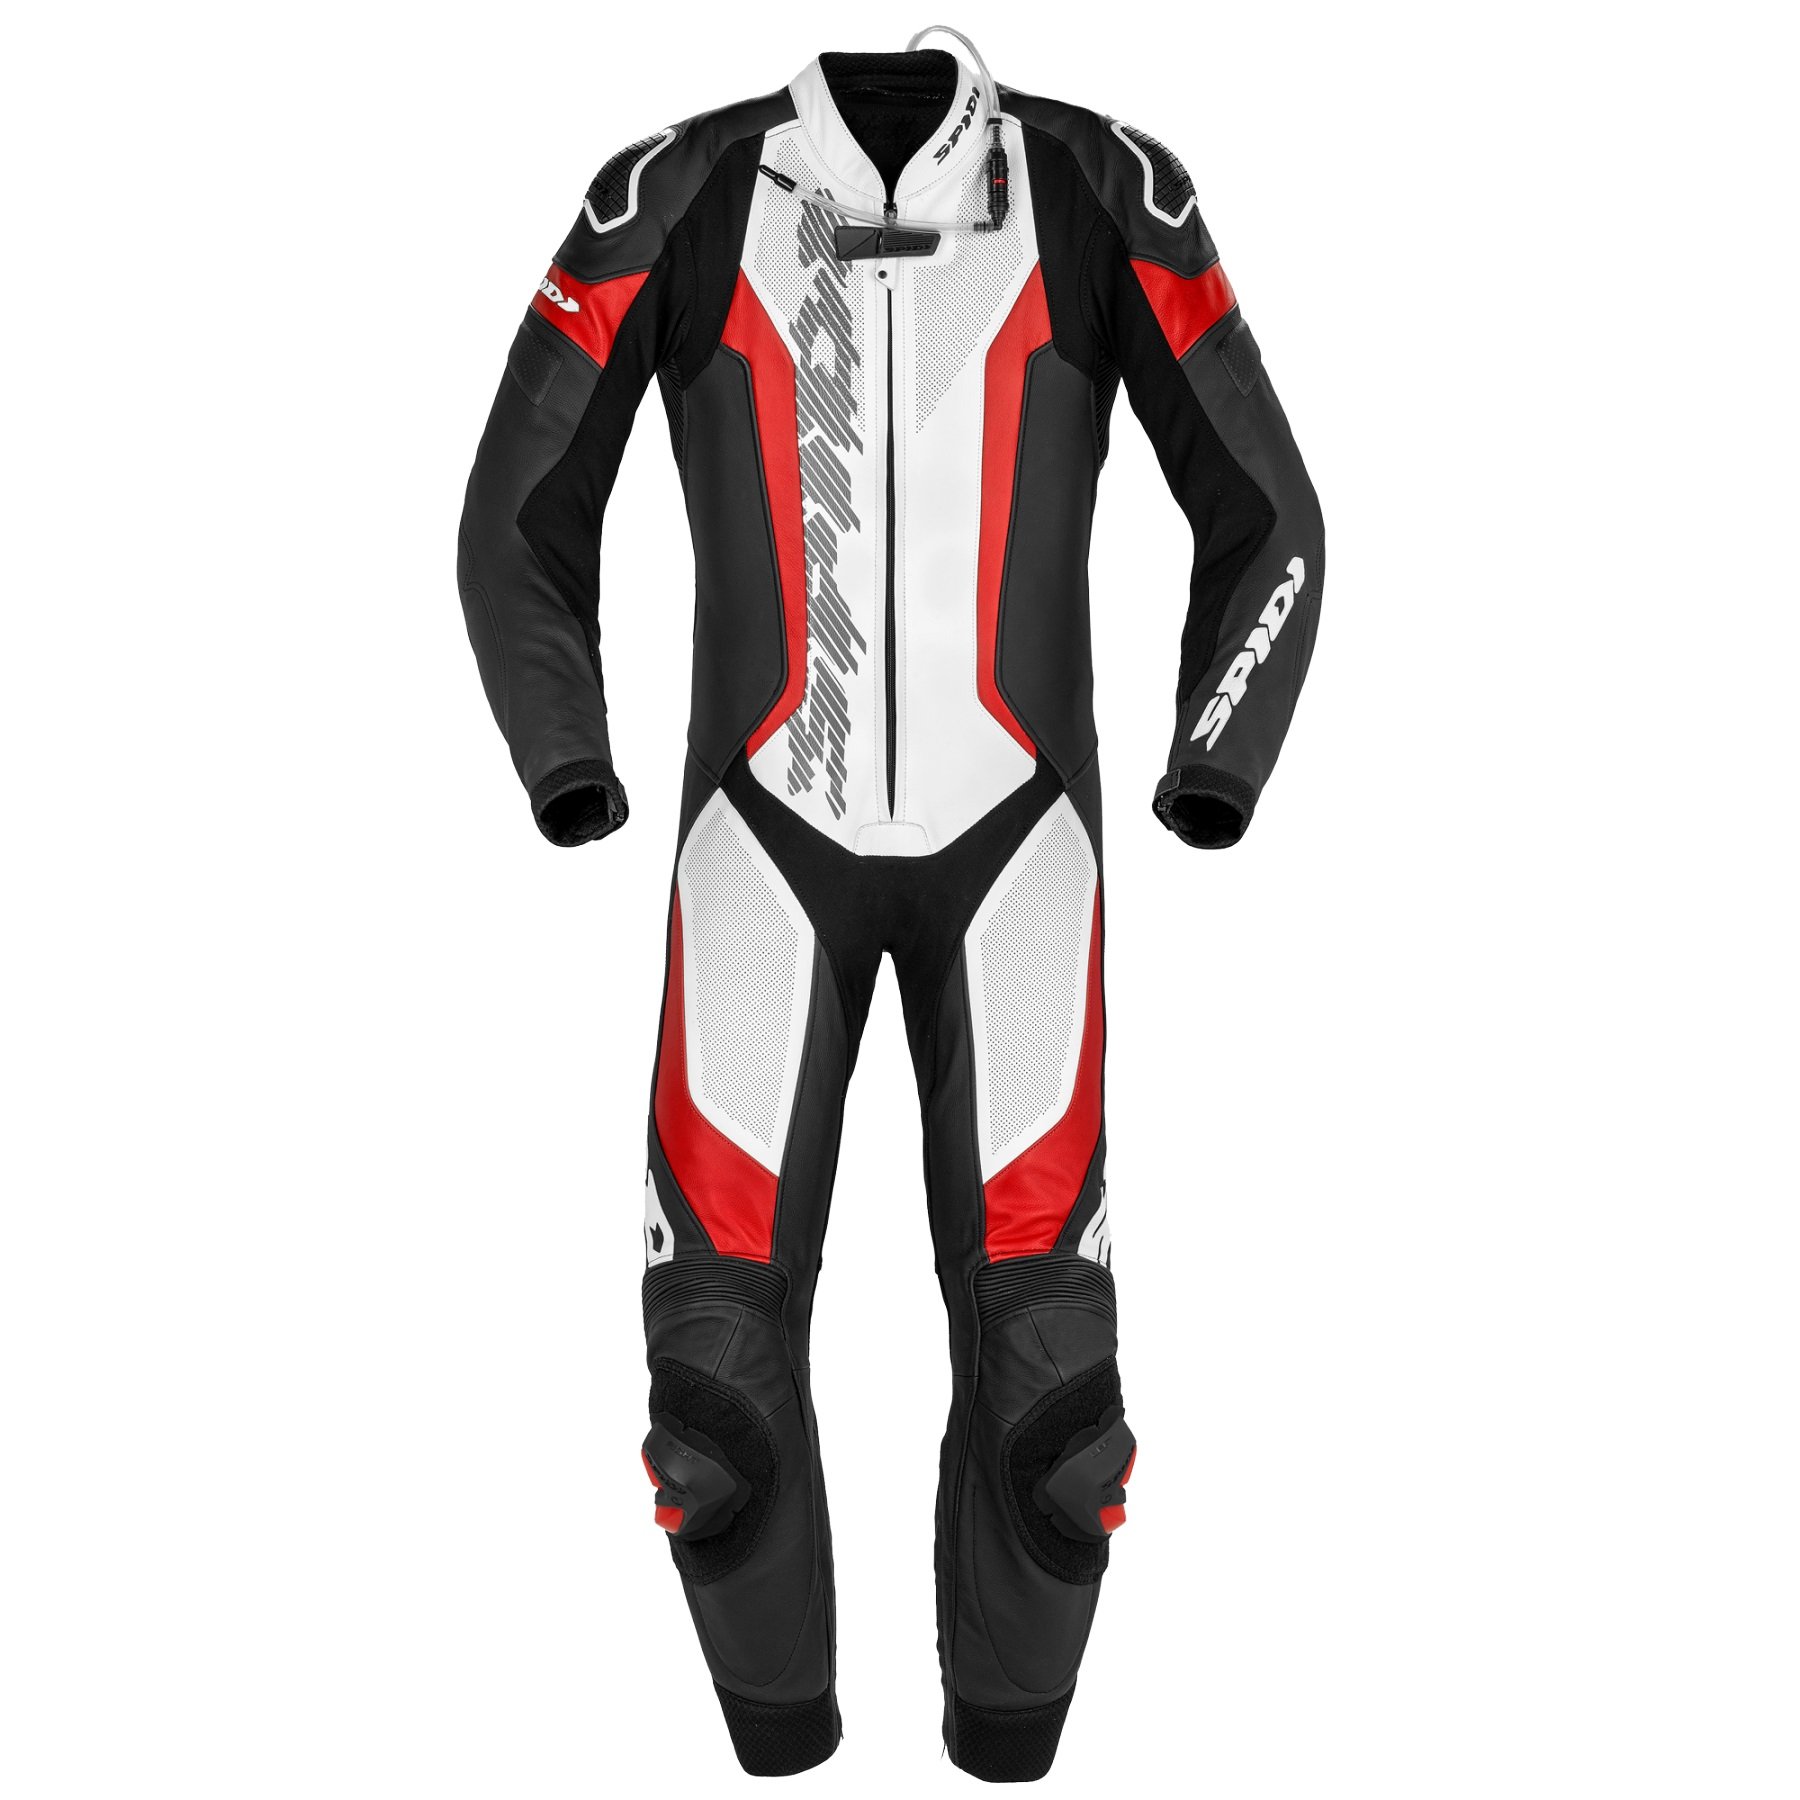 Image of Spidi Laser Pro Perforated Red 1 Piece Motorcycle Racing Suit Talla 54